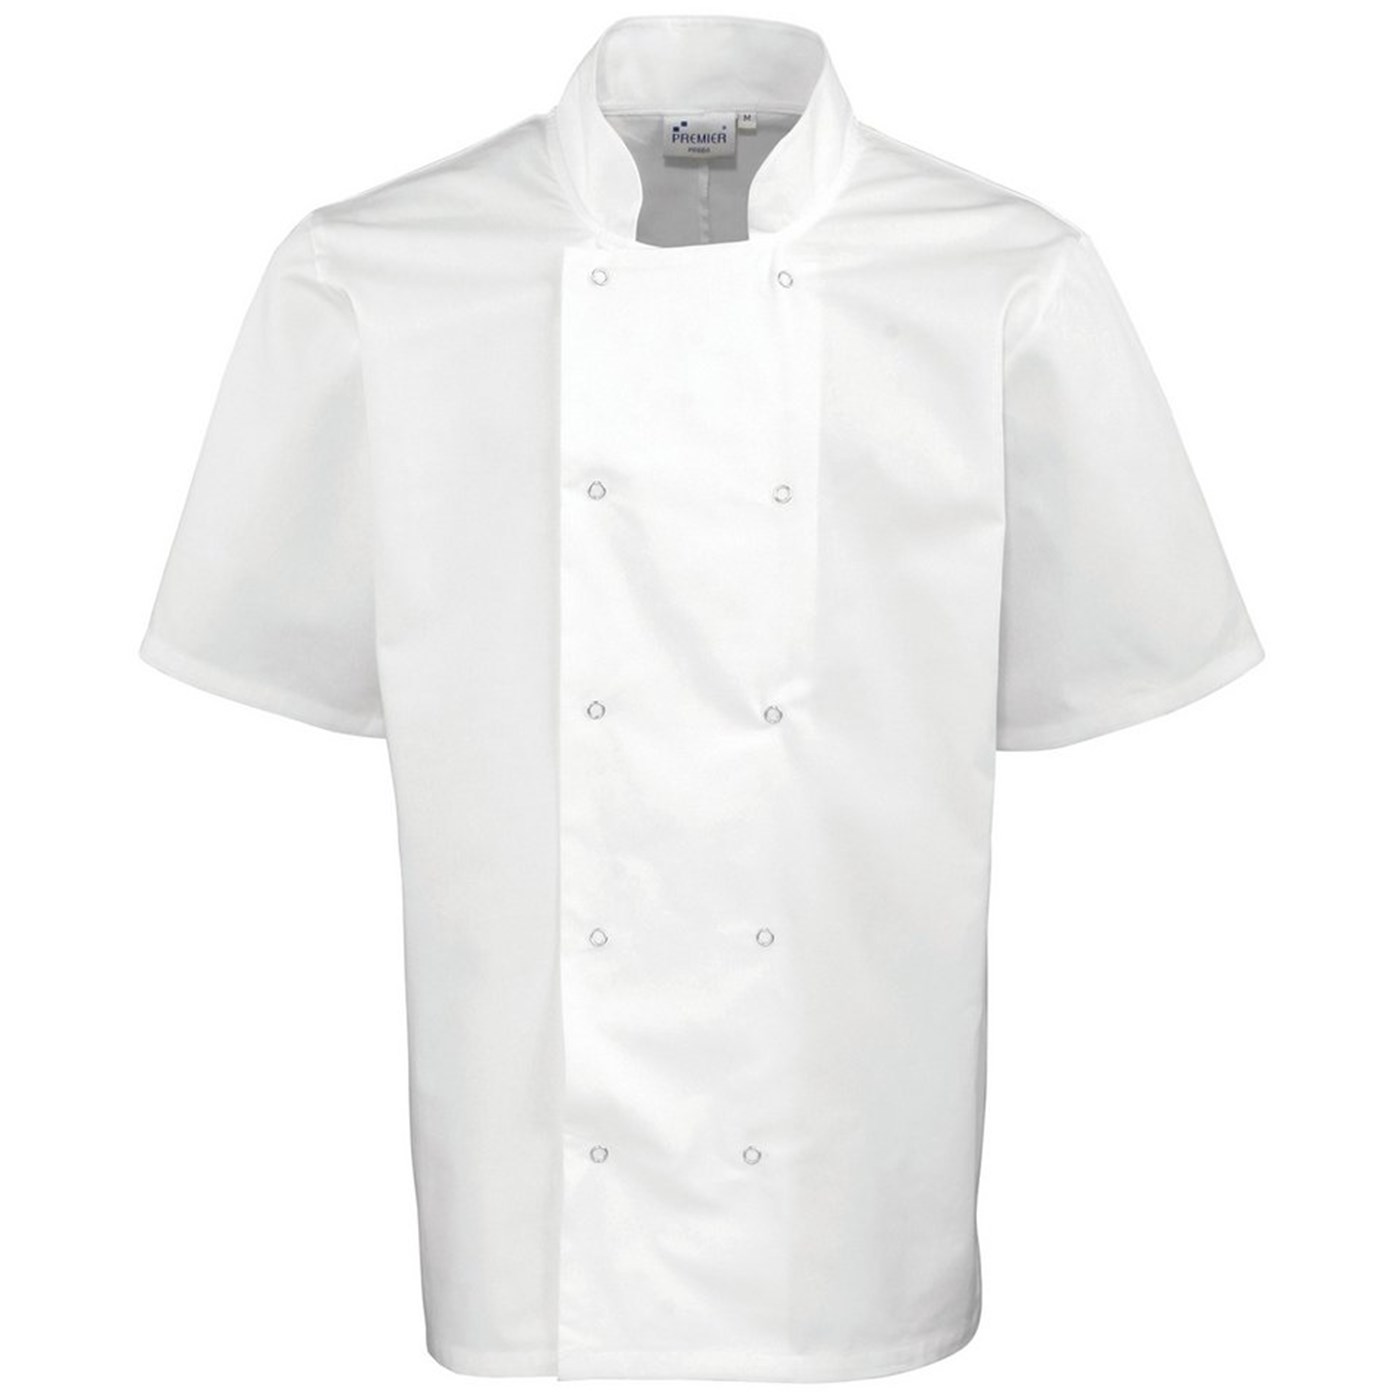 Chefs Coat Chef Jacket In White & Black Colour Unisex Press Studs Good Quality